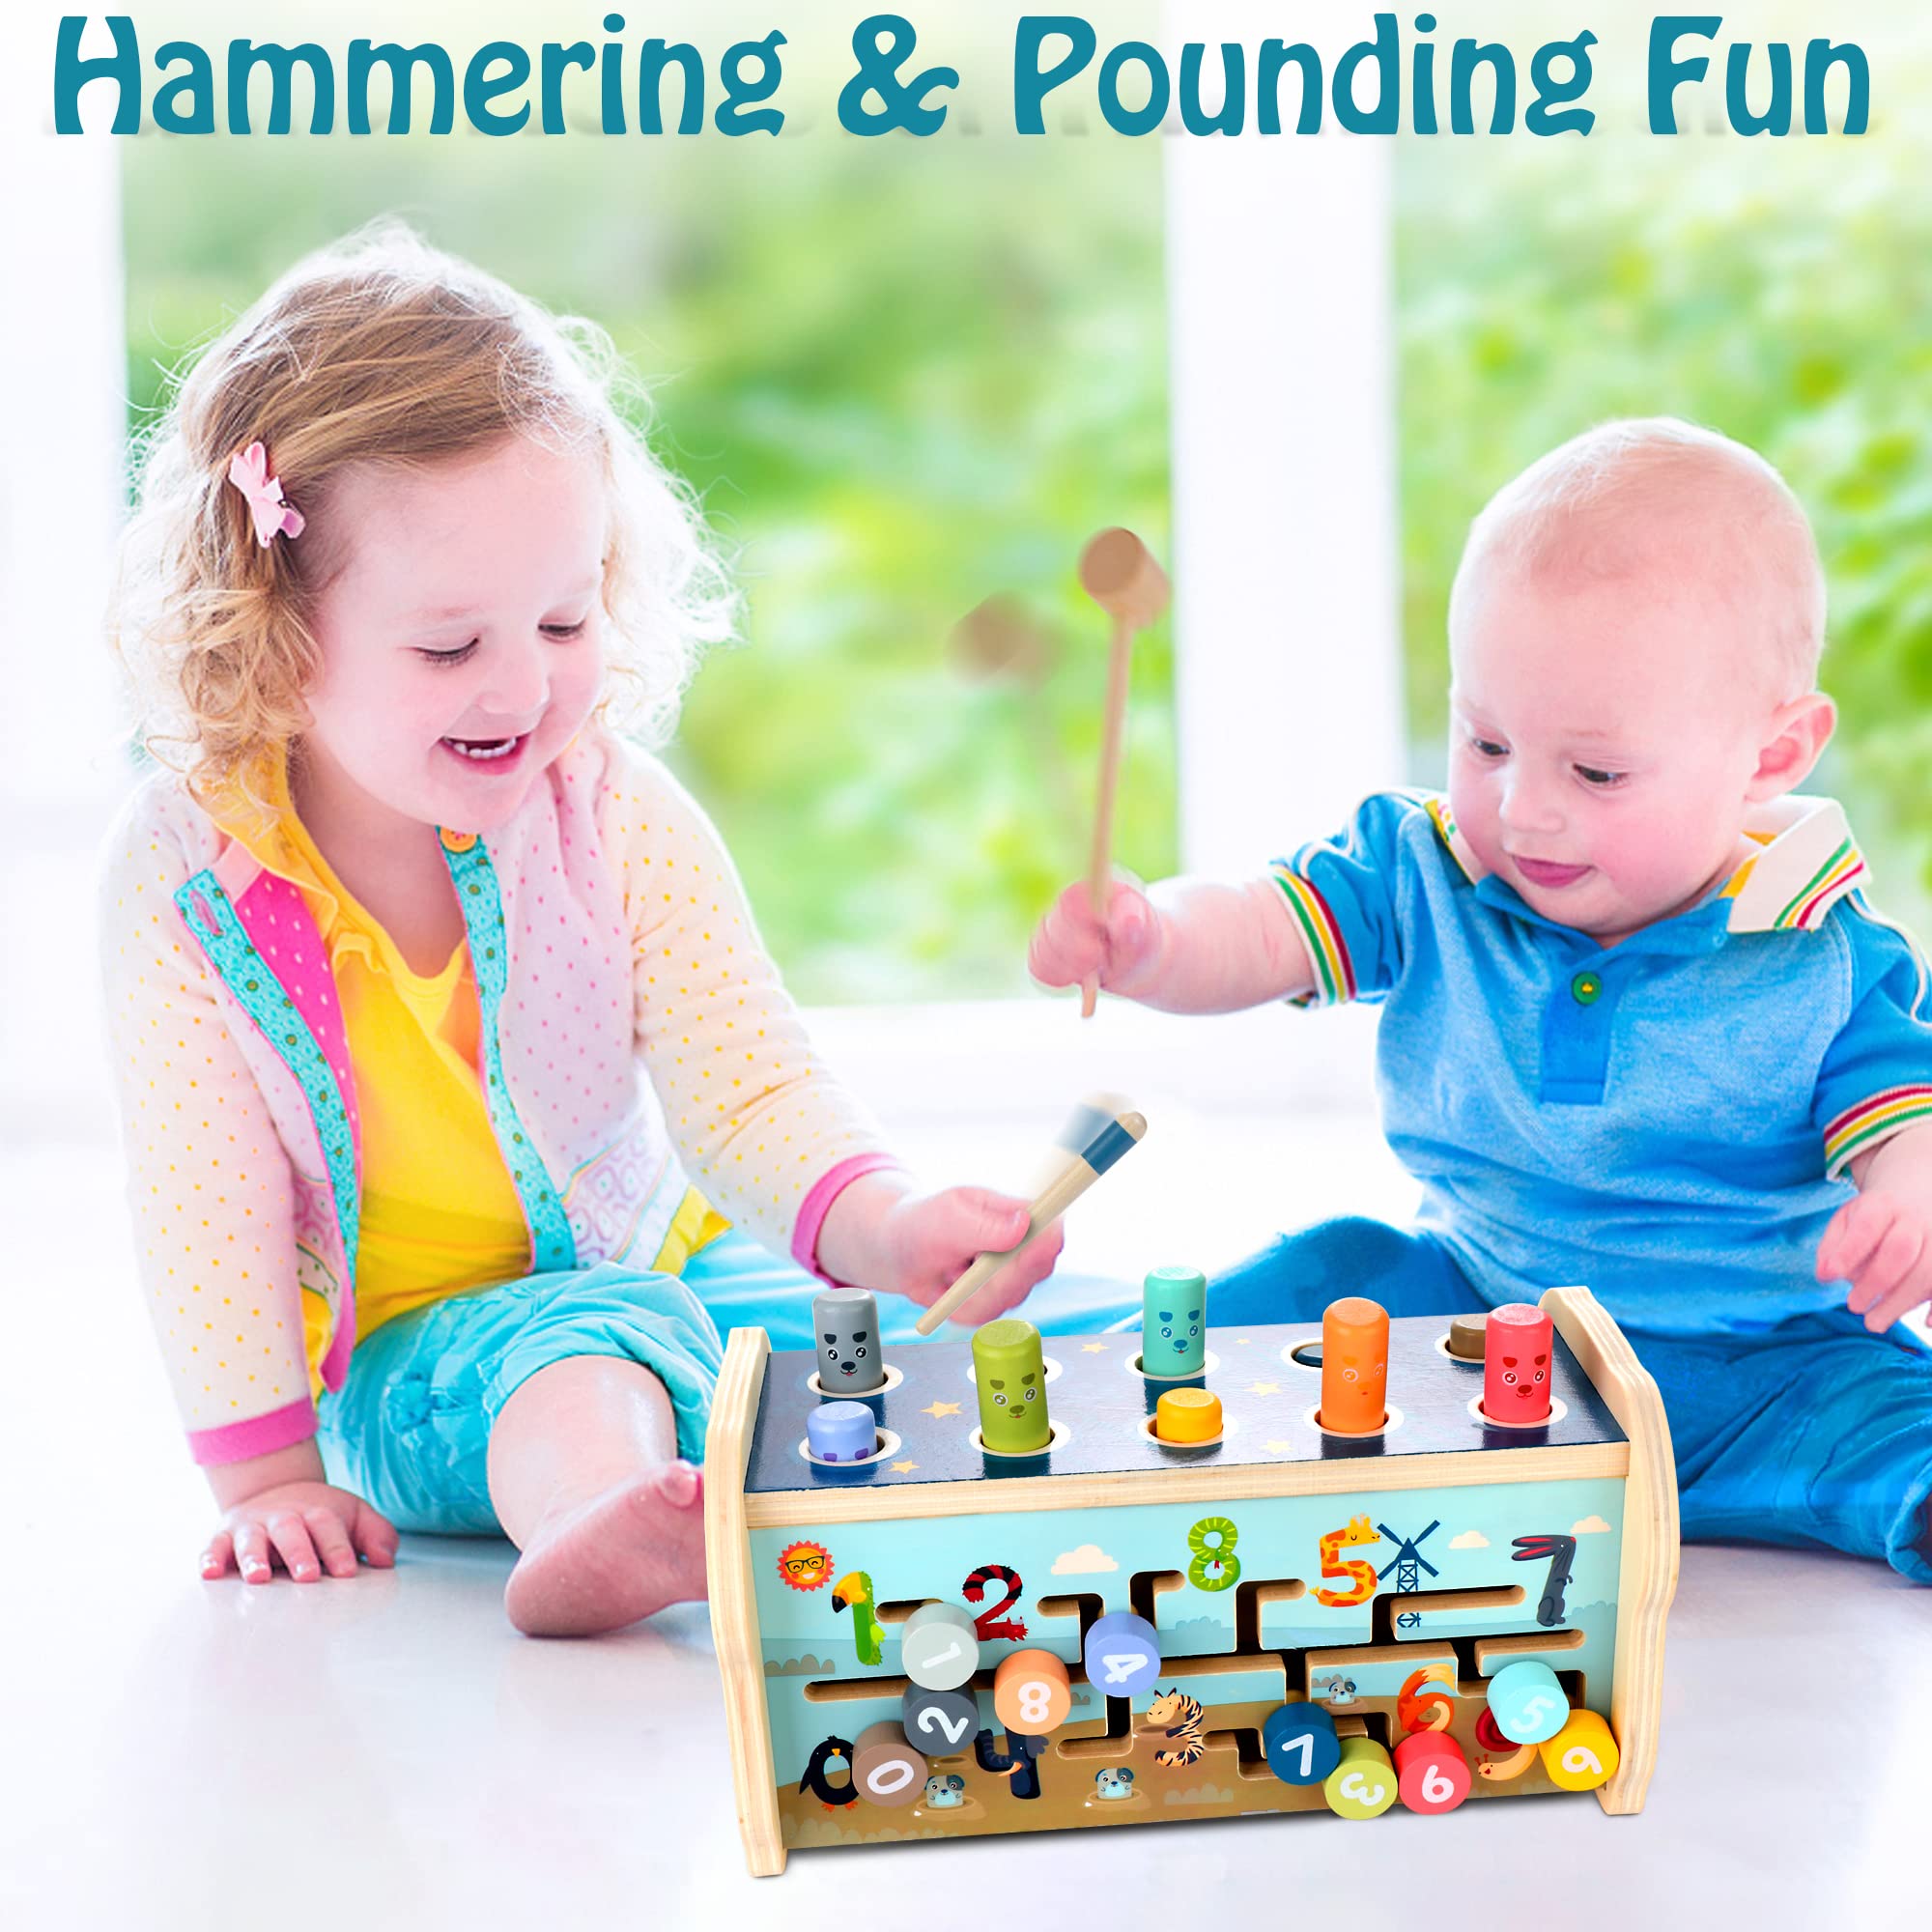 KIDWILL Wooden Hammering Pounding Toy for 12+ Months Kids, Montessori Toys for 1+ Year Old Babies, Early Development Toy with Pounding Bench, Xylophone, Number Sorting Maze, Gifts for Toddlers Age 1-2